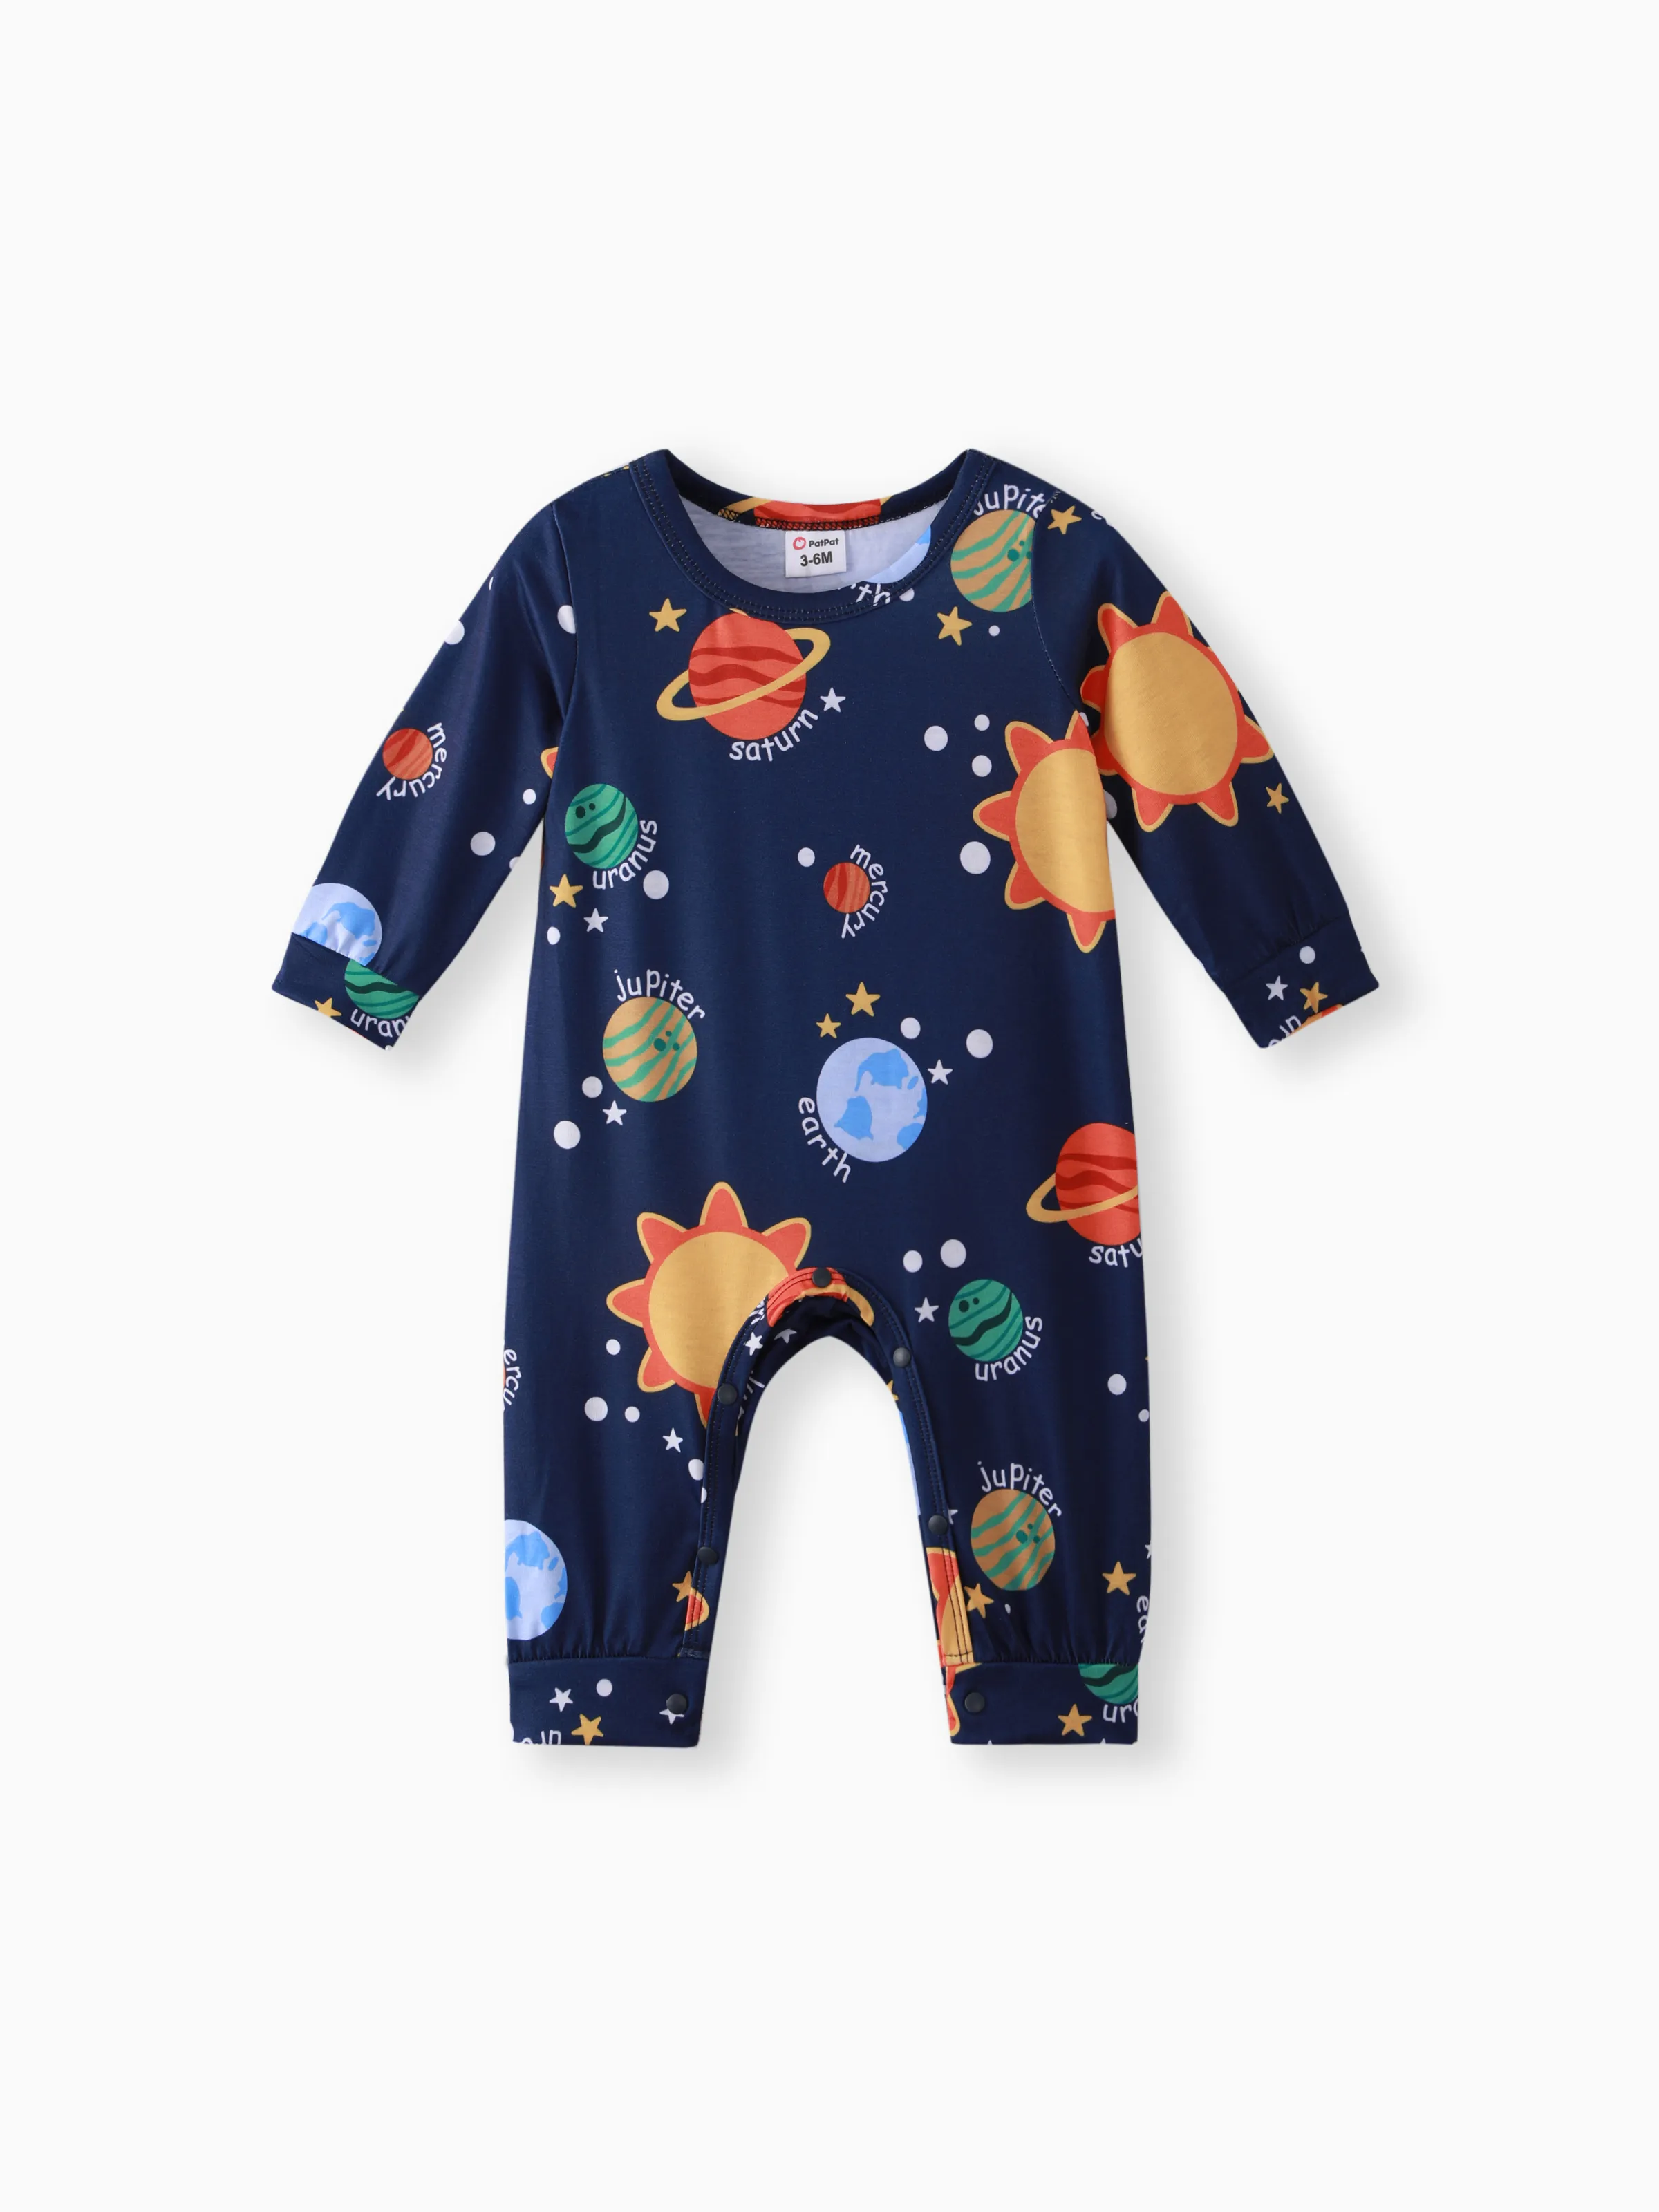 

Baby Boy All Over Solar System Planets and Letter Print Dark Blue Long-sleeve Jumpsuit